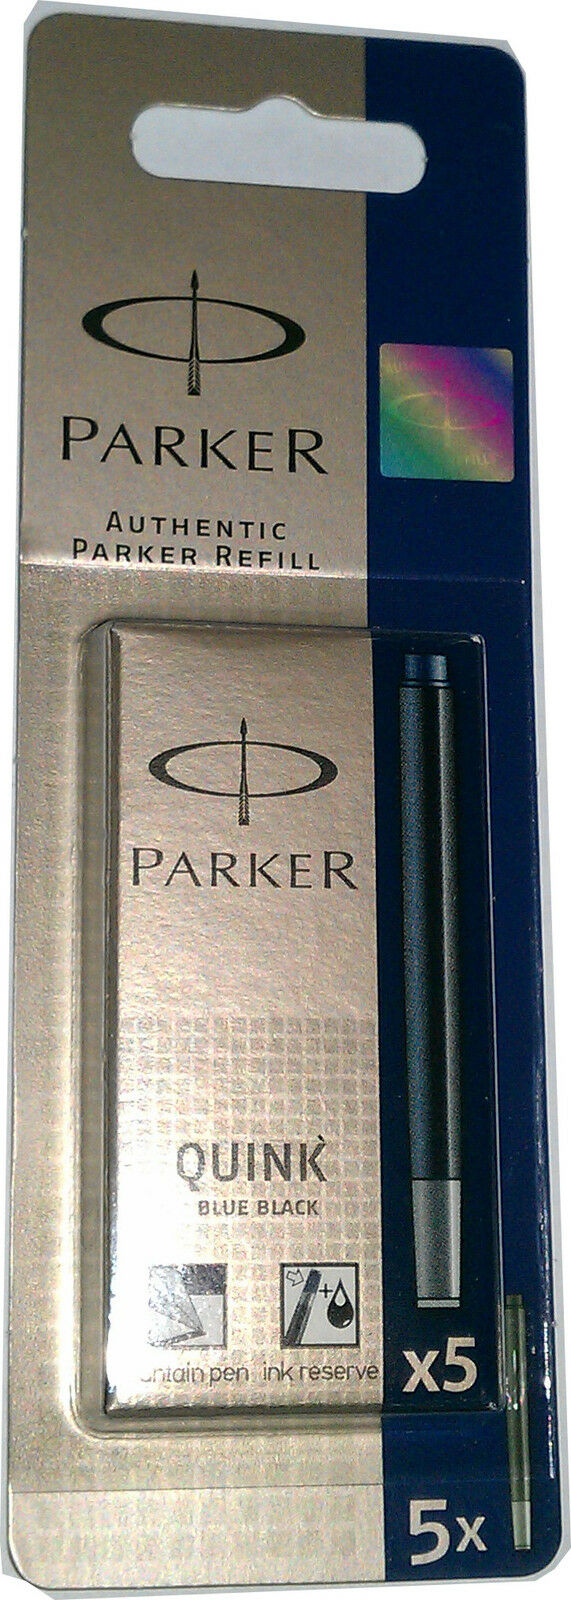 Parker Authentic Quink Ink Refill Blue For Fountain Pen 2 Packs of 5 10 